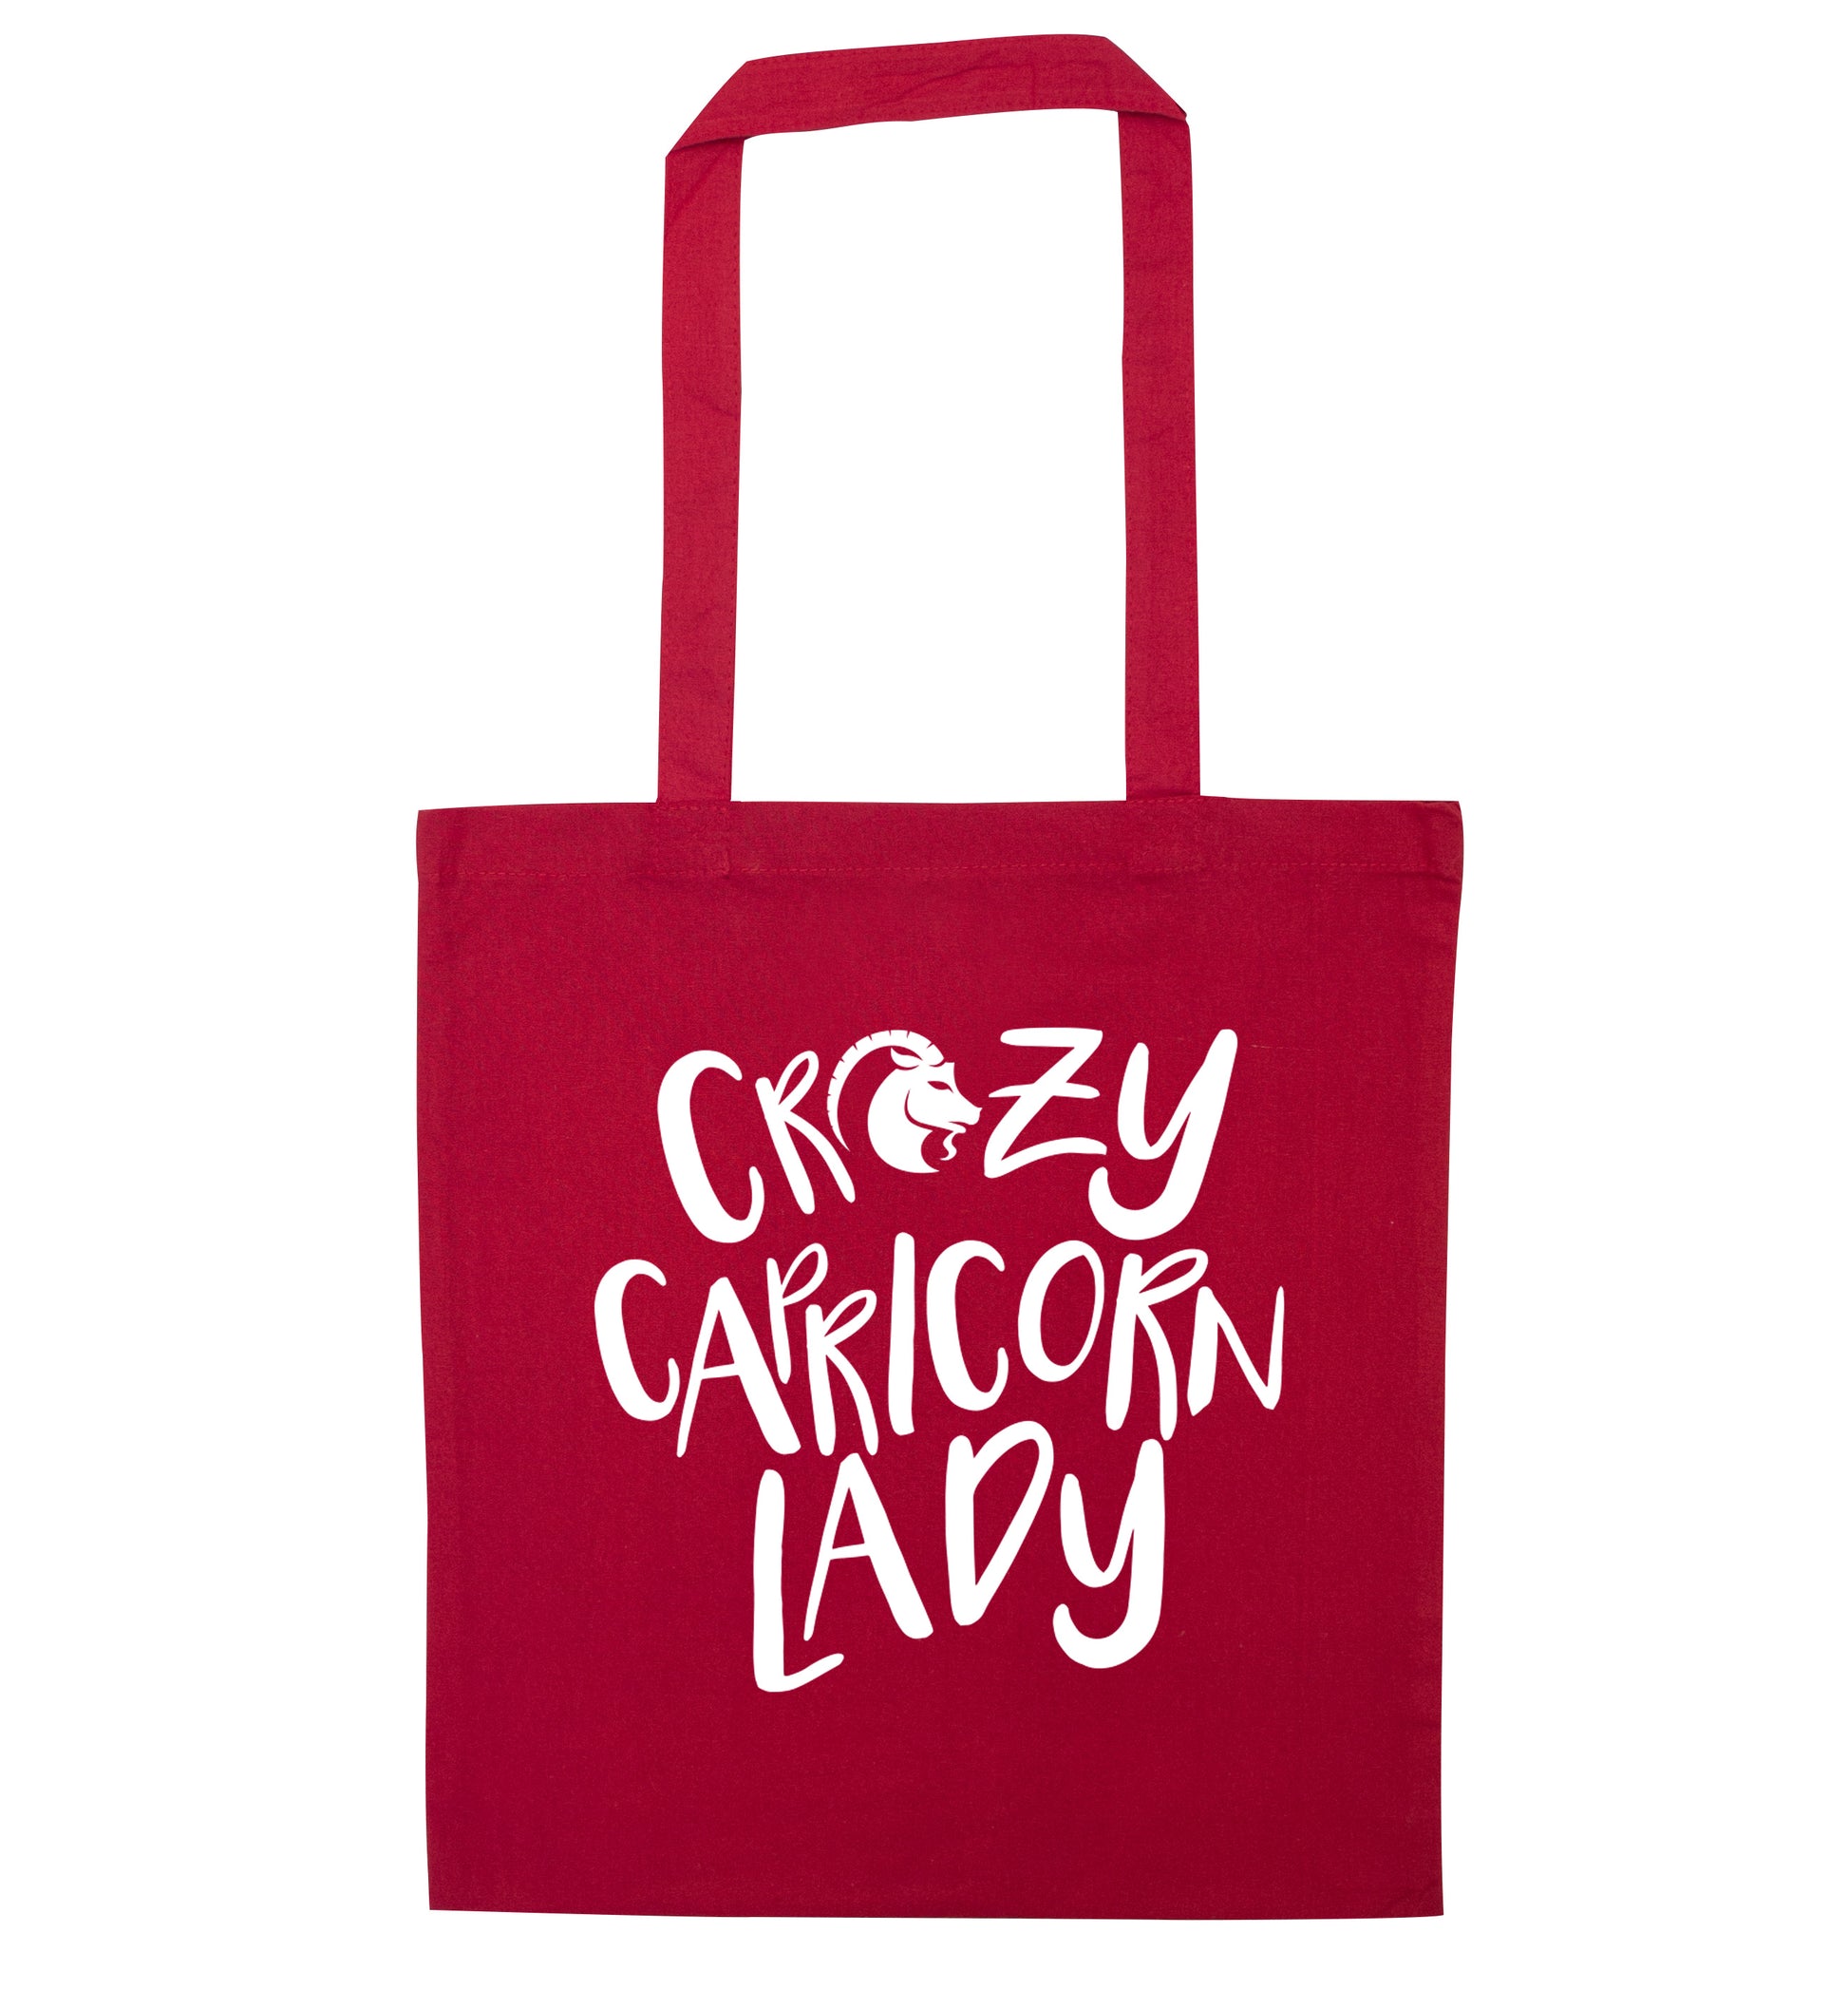 Crazy capricorn lady red tote bag